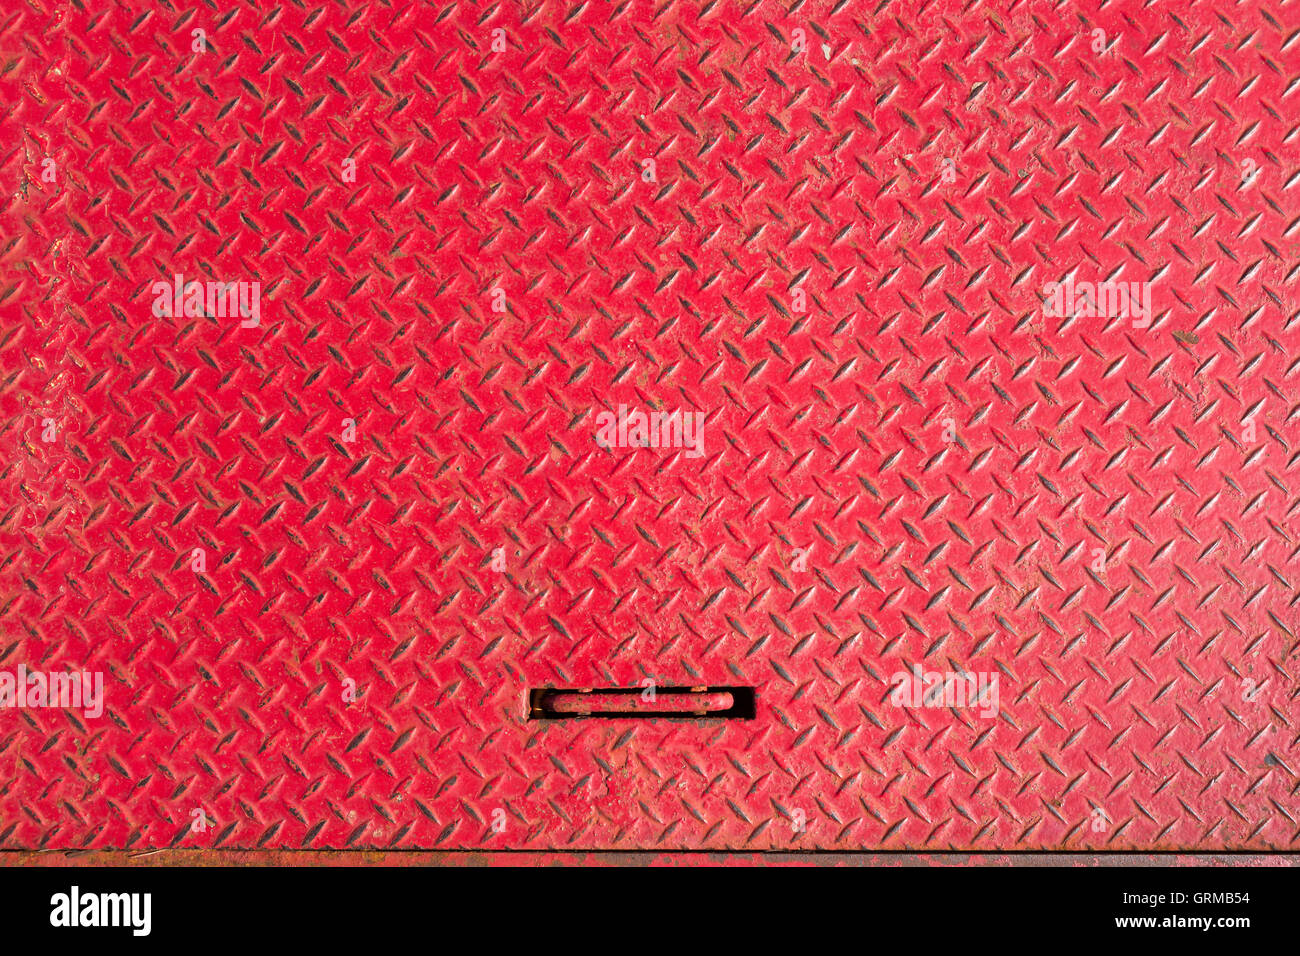 Red textured metal grate for background. Stock Photo